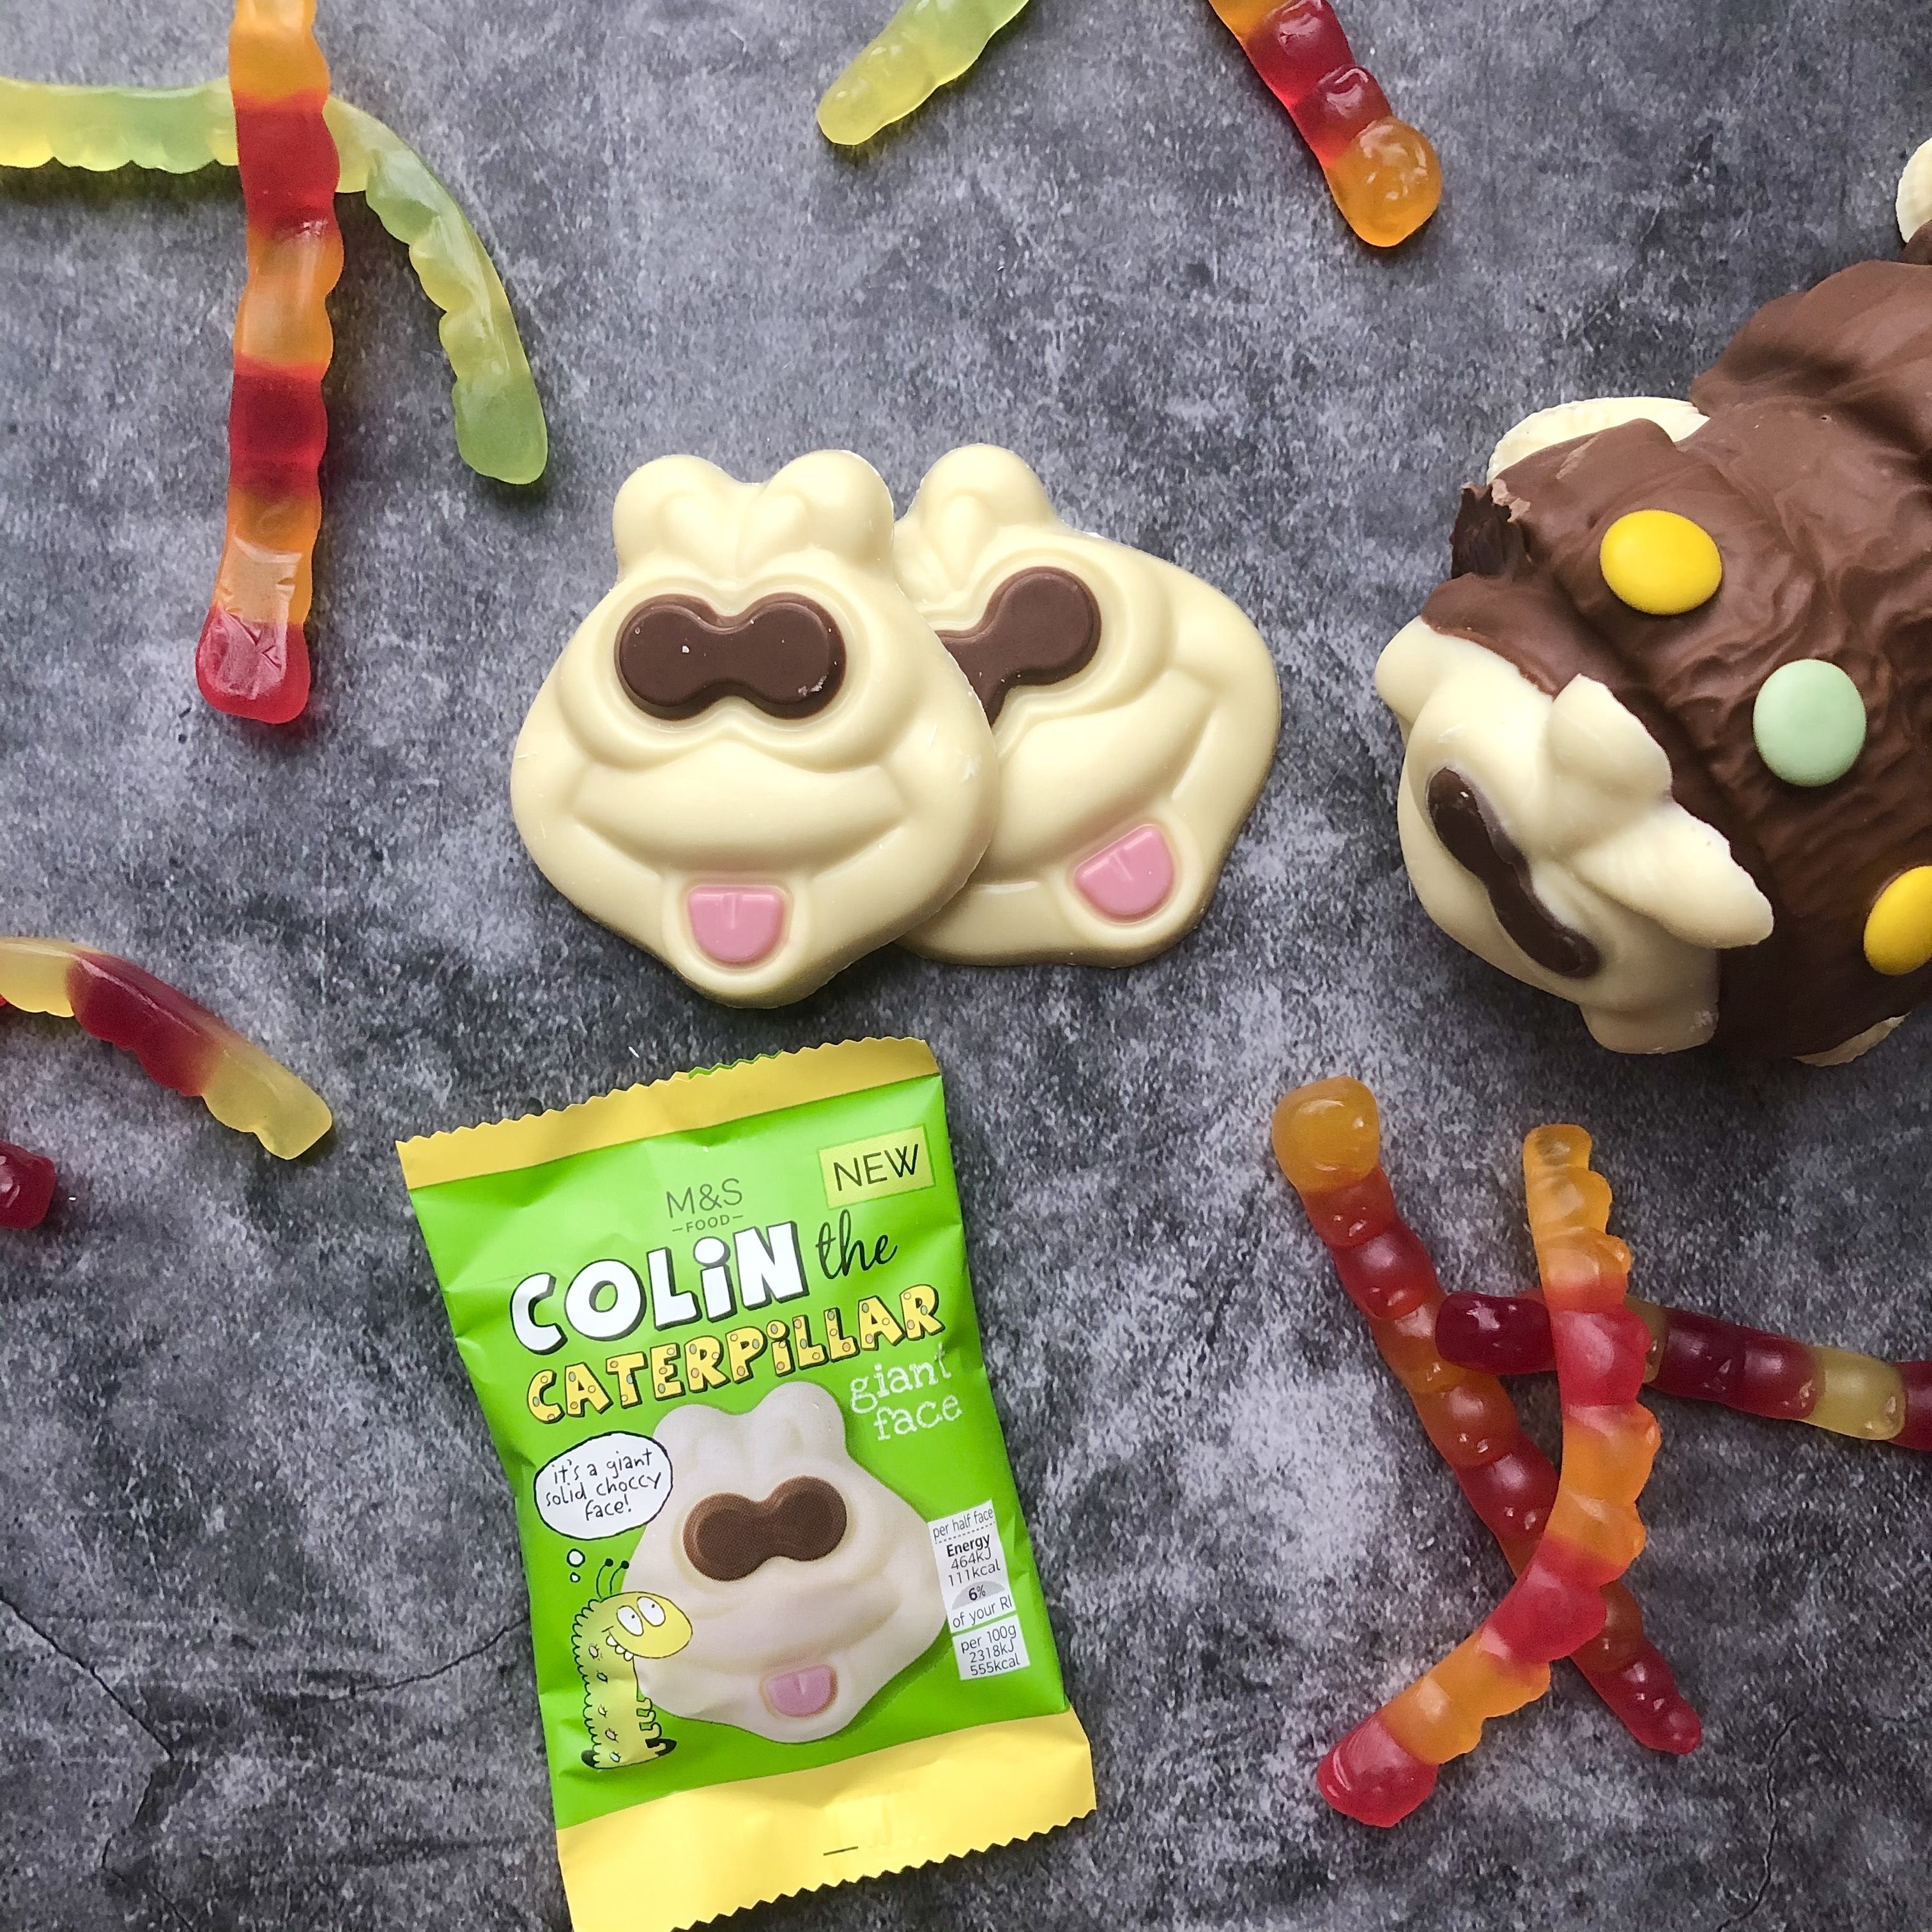 Colin The Caterpillar Cake Faces Are On Sale Now In M S